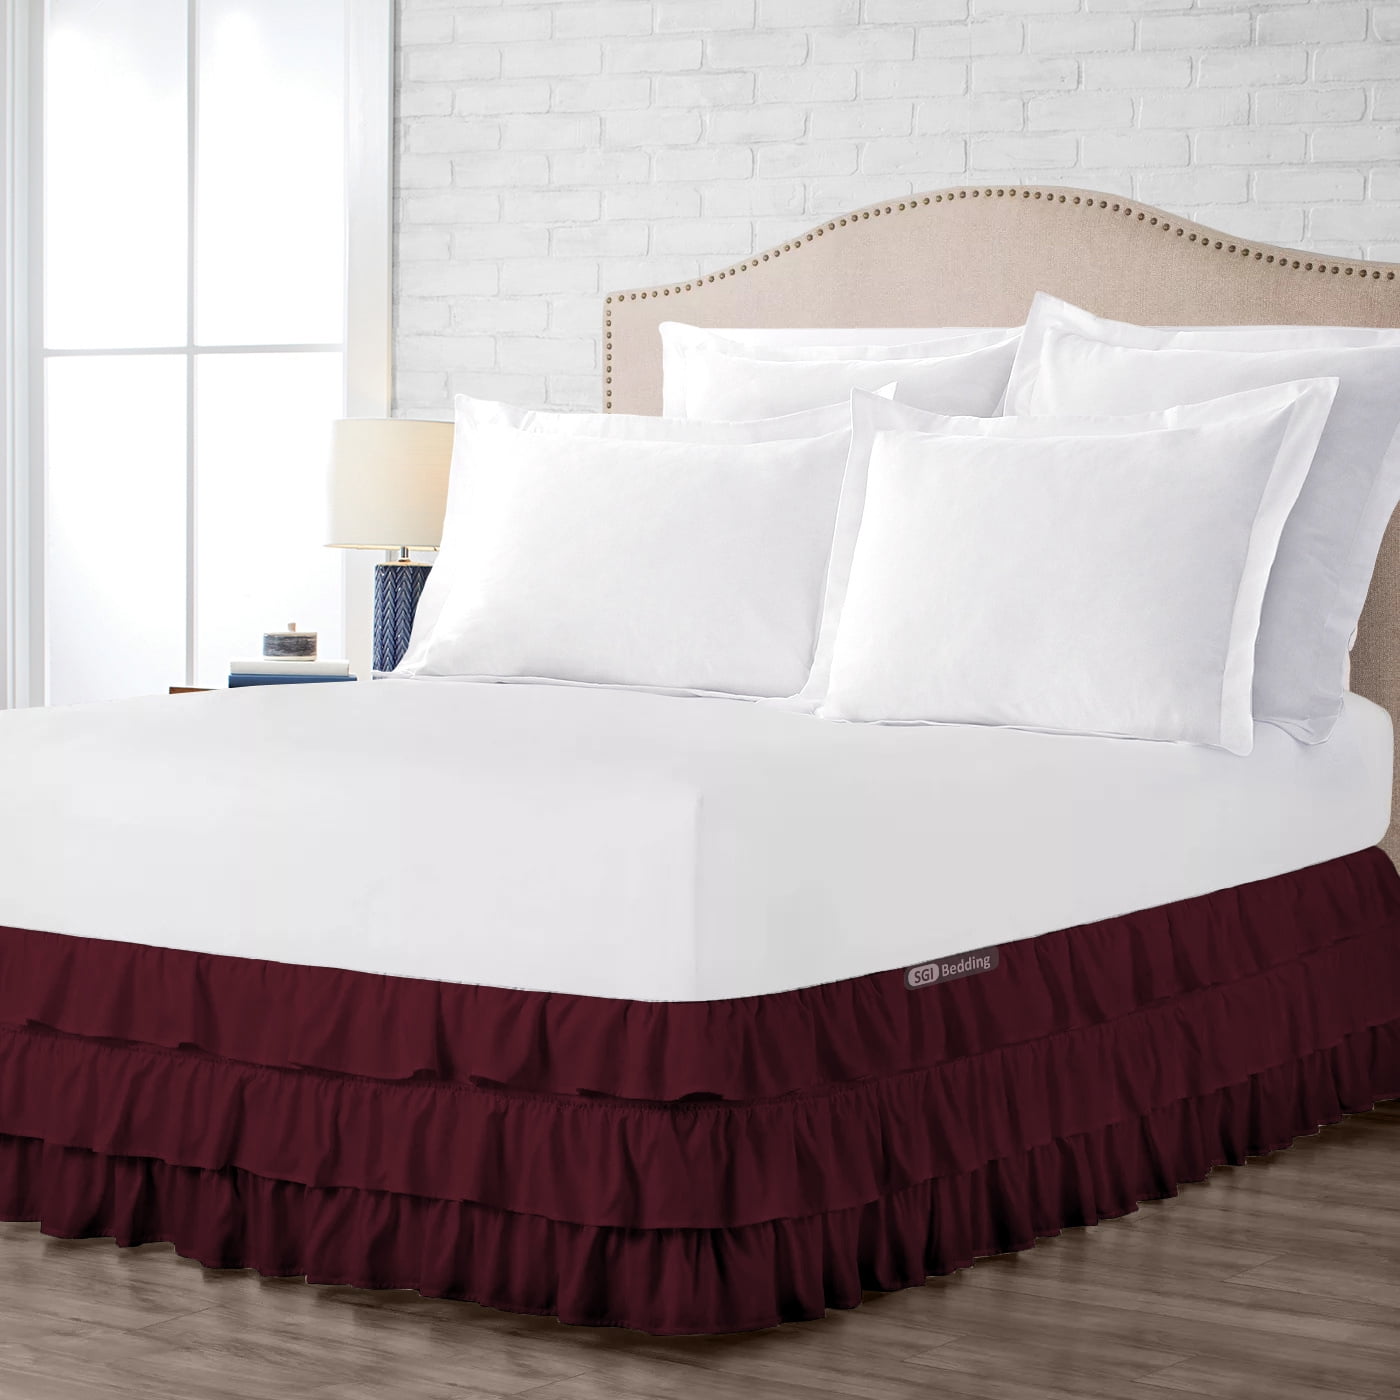 Red Solid Silky Satin Bed Skirt Queen Size Dust Ruffle Bedding 14" Drop WOW! 